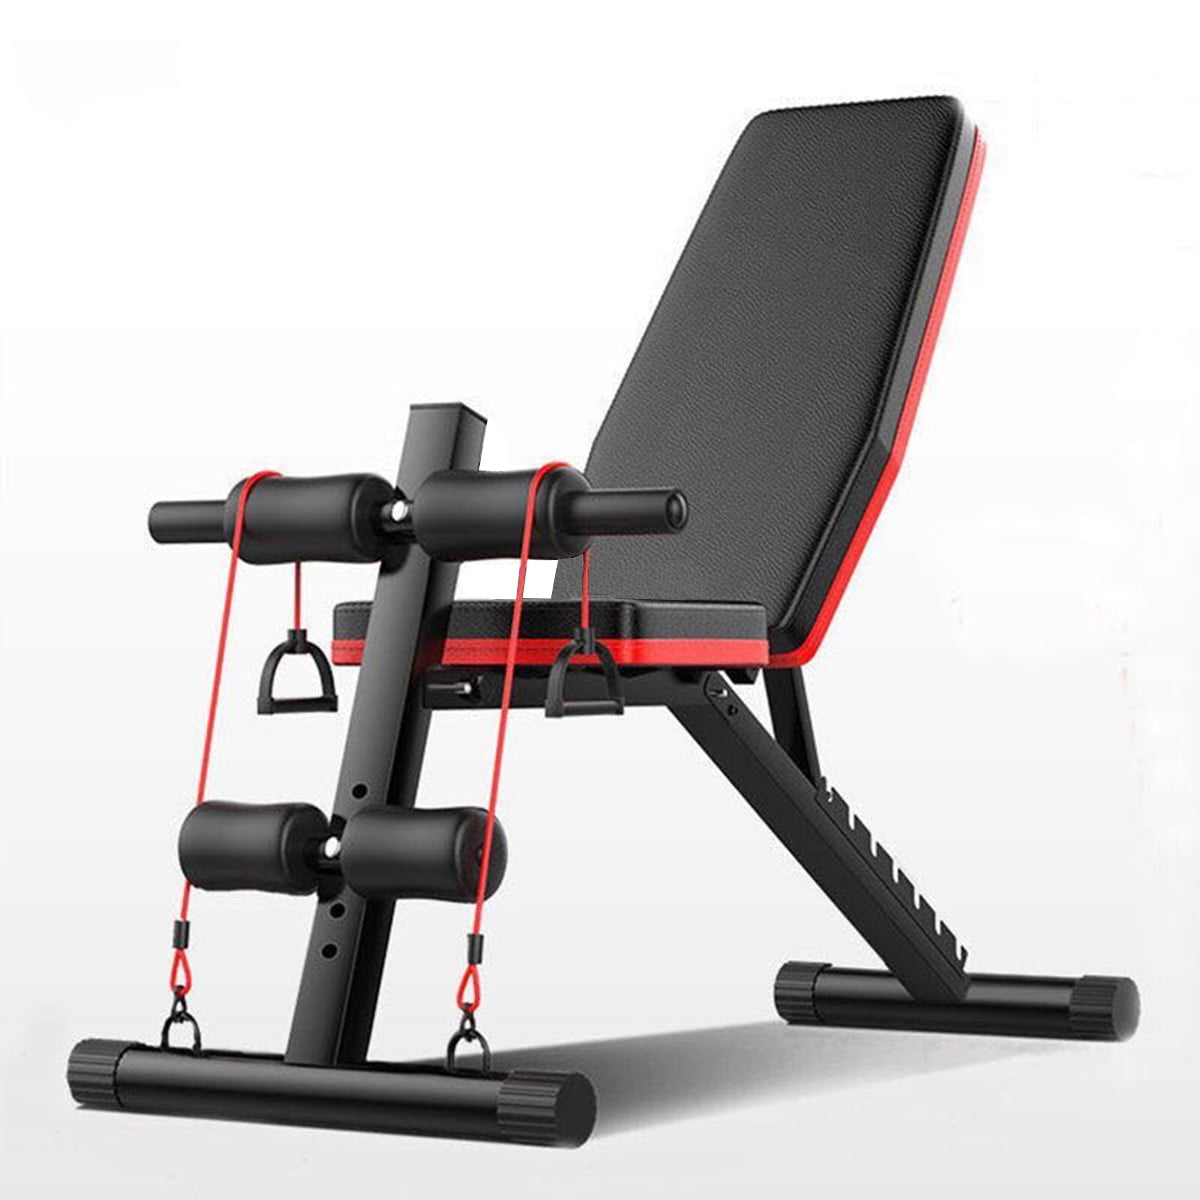 Foldable Workout Bench Home Gym Strength Exercise Fitness Training Equipment